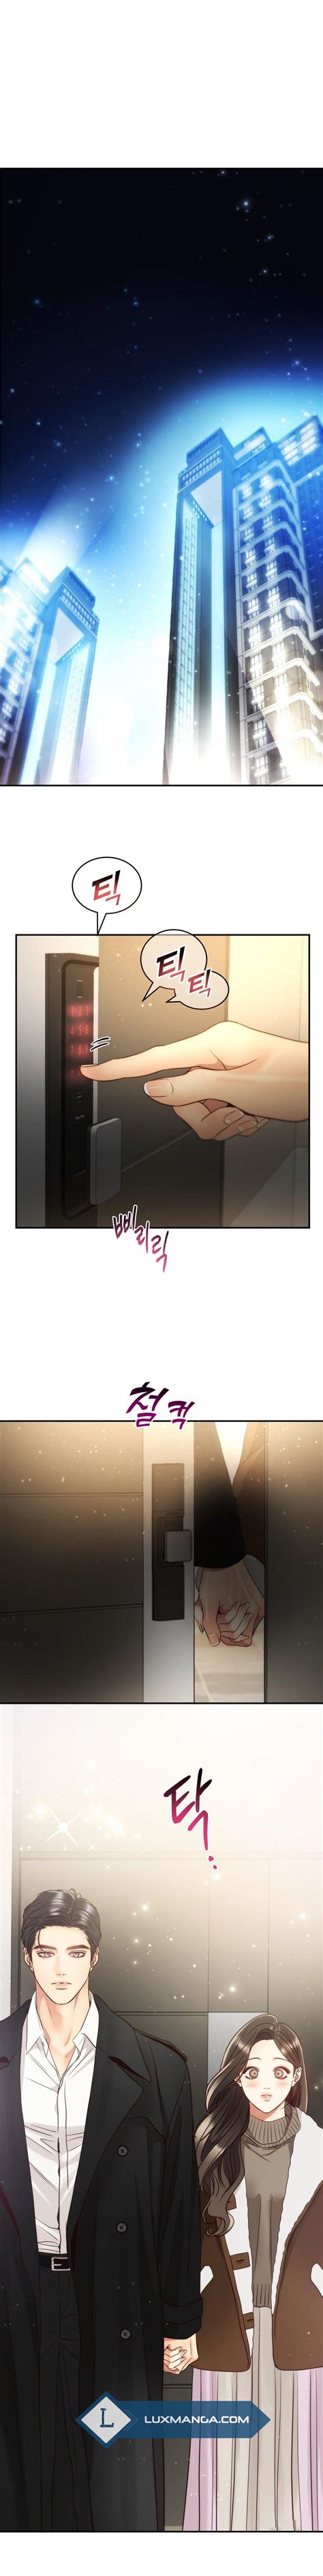 You are reading Daytime Star Chapter 39 at daytime-star.com. Posted in Daytime Star, Daytime Star Manga, Daytime Star Manhwa, Daytime Star Manhwa Daytime Star Webtoon, Read Daytime Star. Previous Daytime Star Chapter 38. Next Daytime Star Chapter 40. • 1 month ago. I feel like she wrote "me, I'm ur bday present.". 